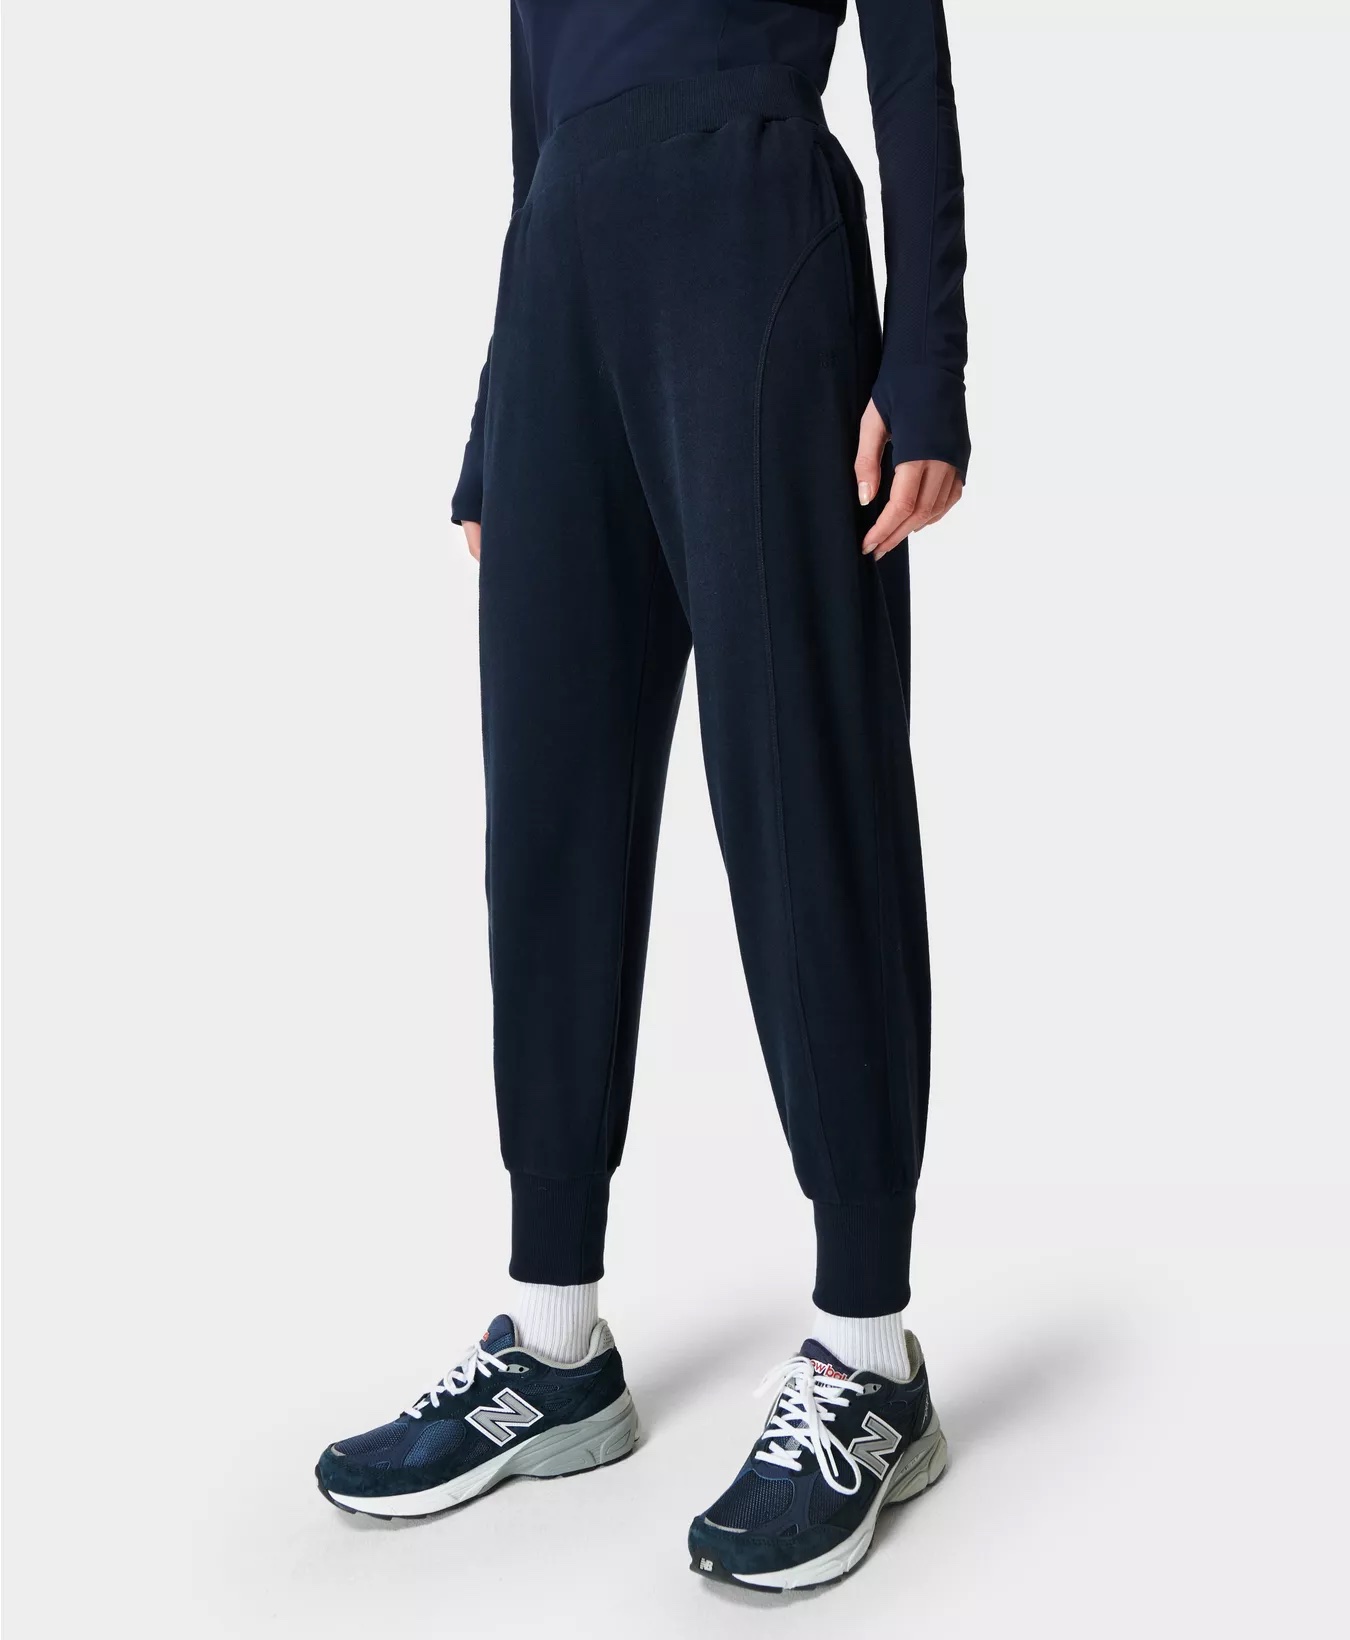 These popular sherpa-lined sweatpants from  are a 'winter